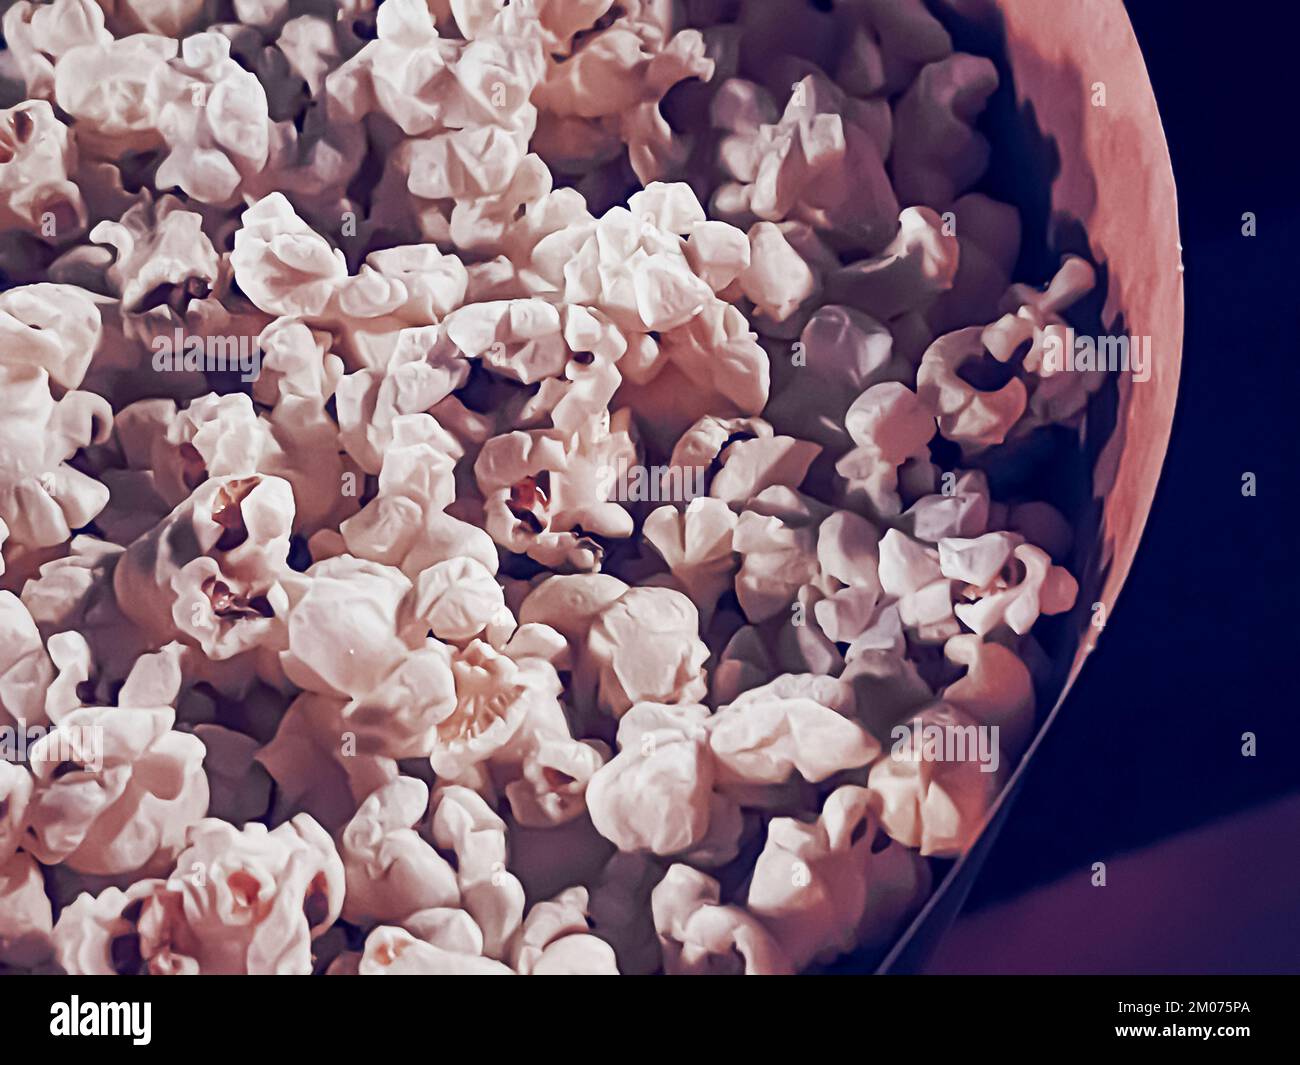 Cinema and entertainment, popcorn box in the movie theatre for tv show streaming service and film industry production branding Stock Photo